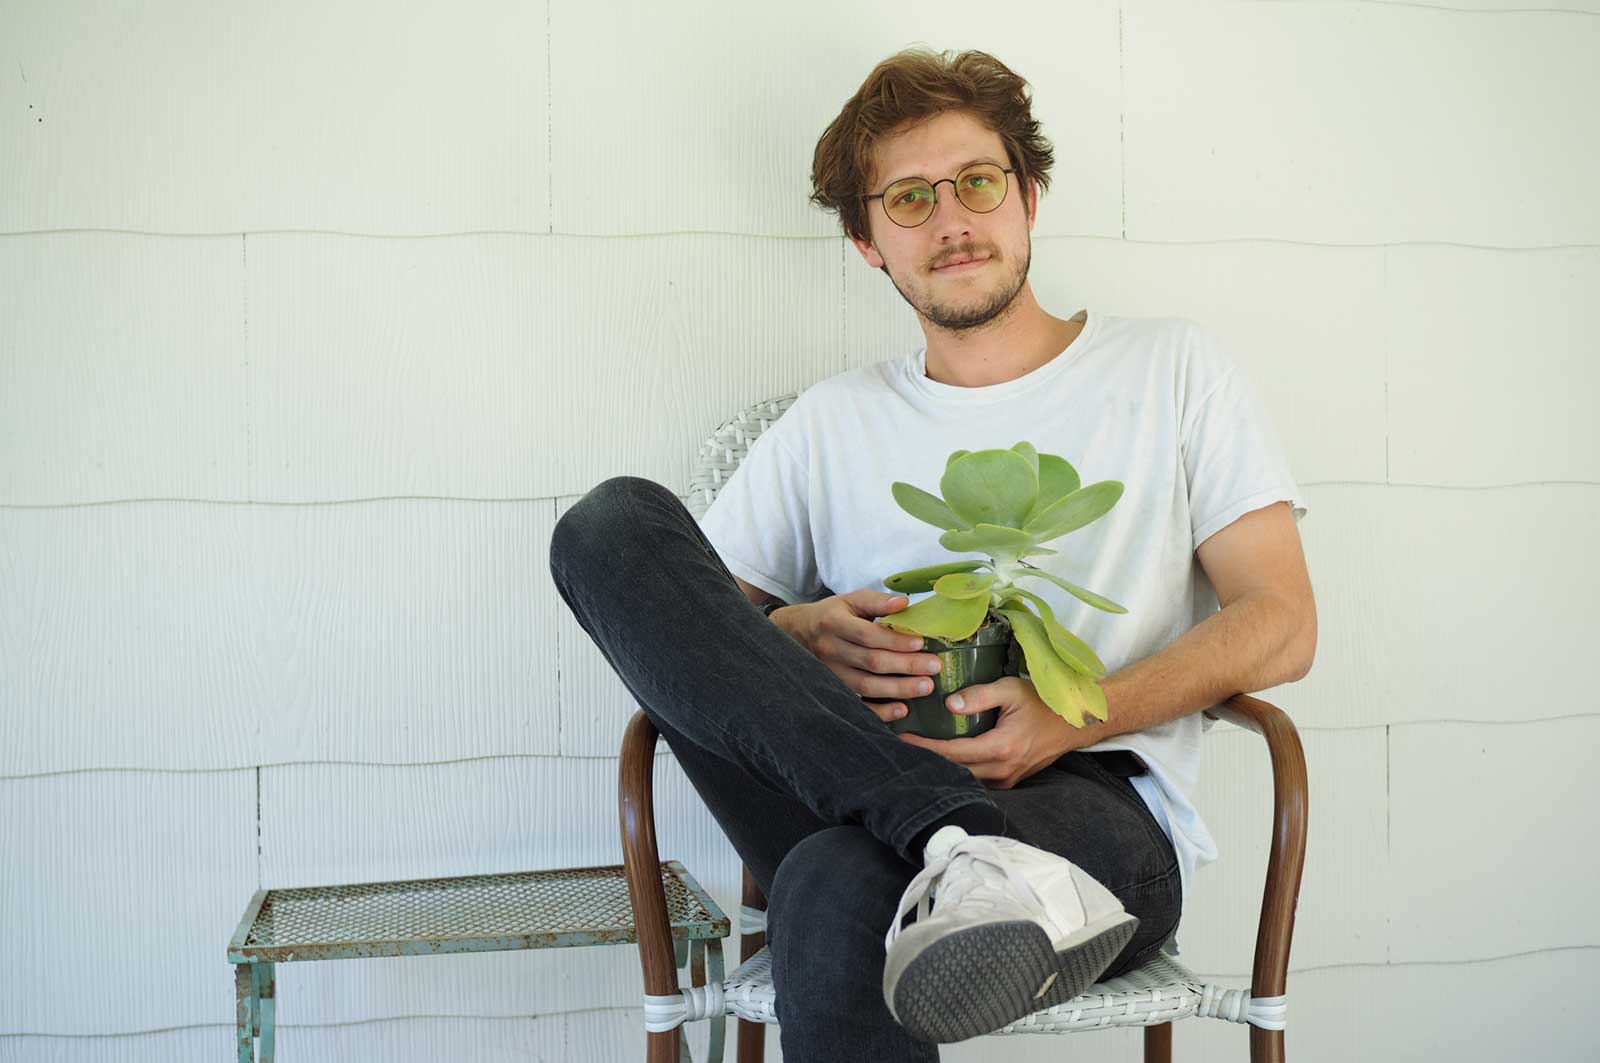 Aubrey Pohl sits outside on a front porch with leg crossed and holding a green leaf plant 